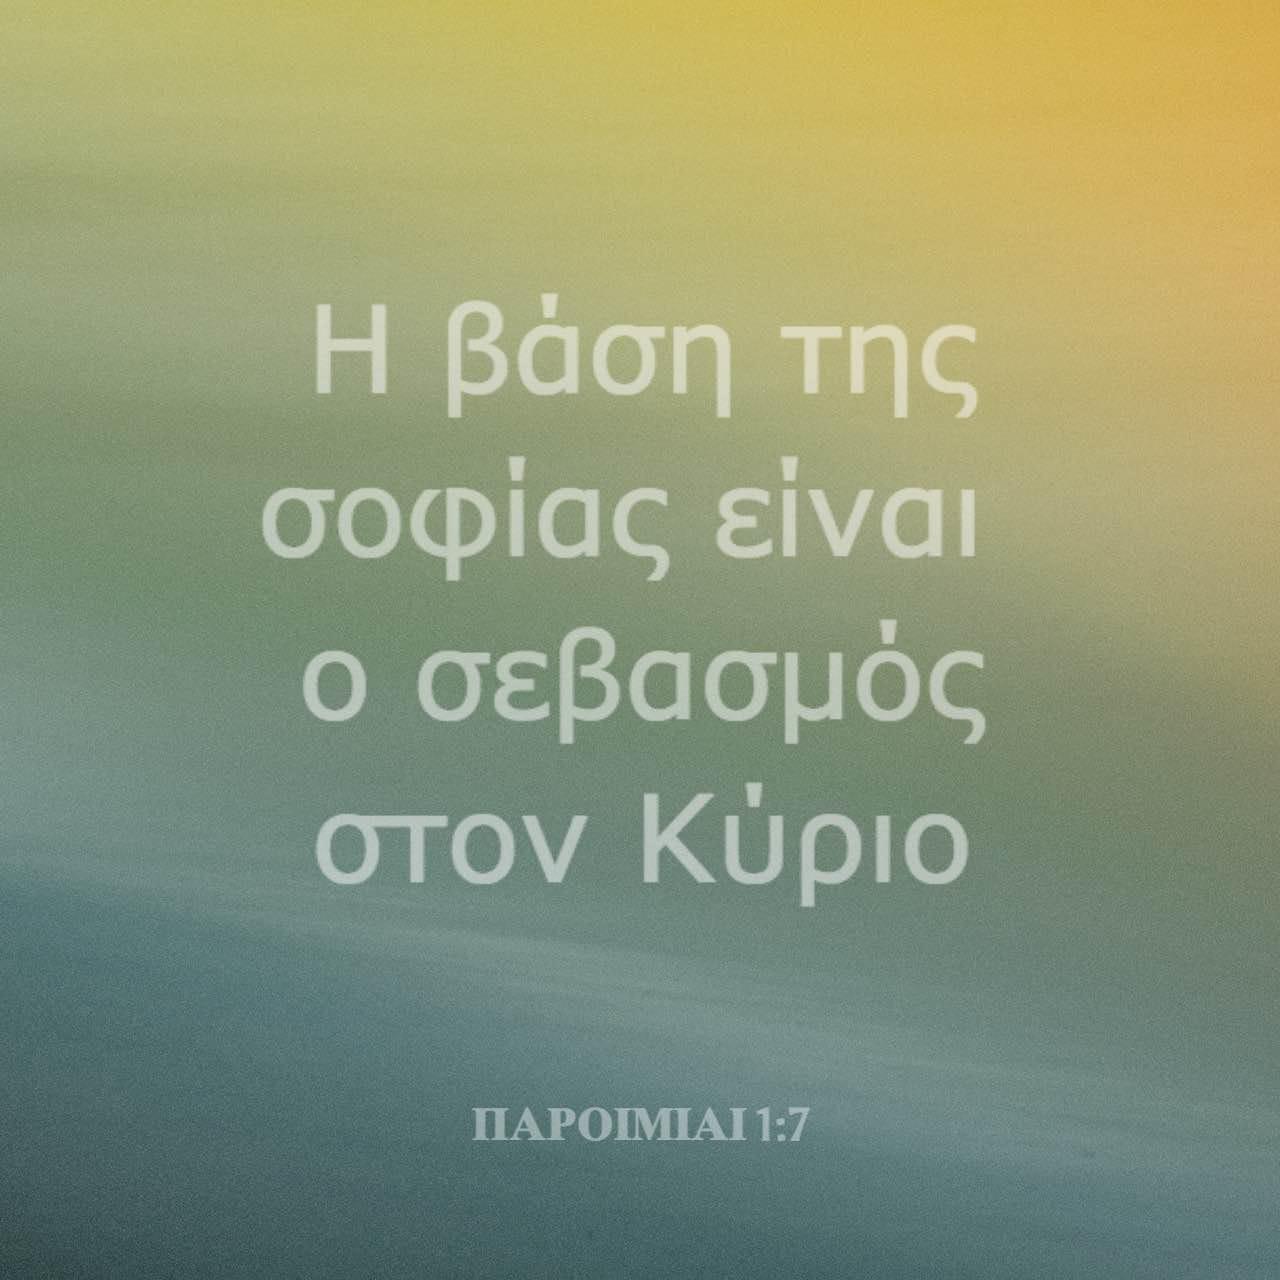 Bible Verse of the Day - day 87 - image 19369 (ΠΑΡΟΙΜΙΑΙ 1:7)